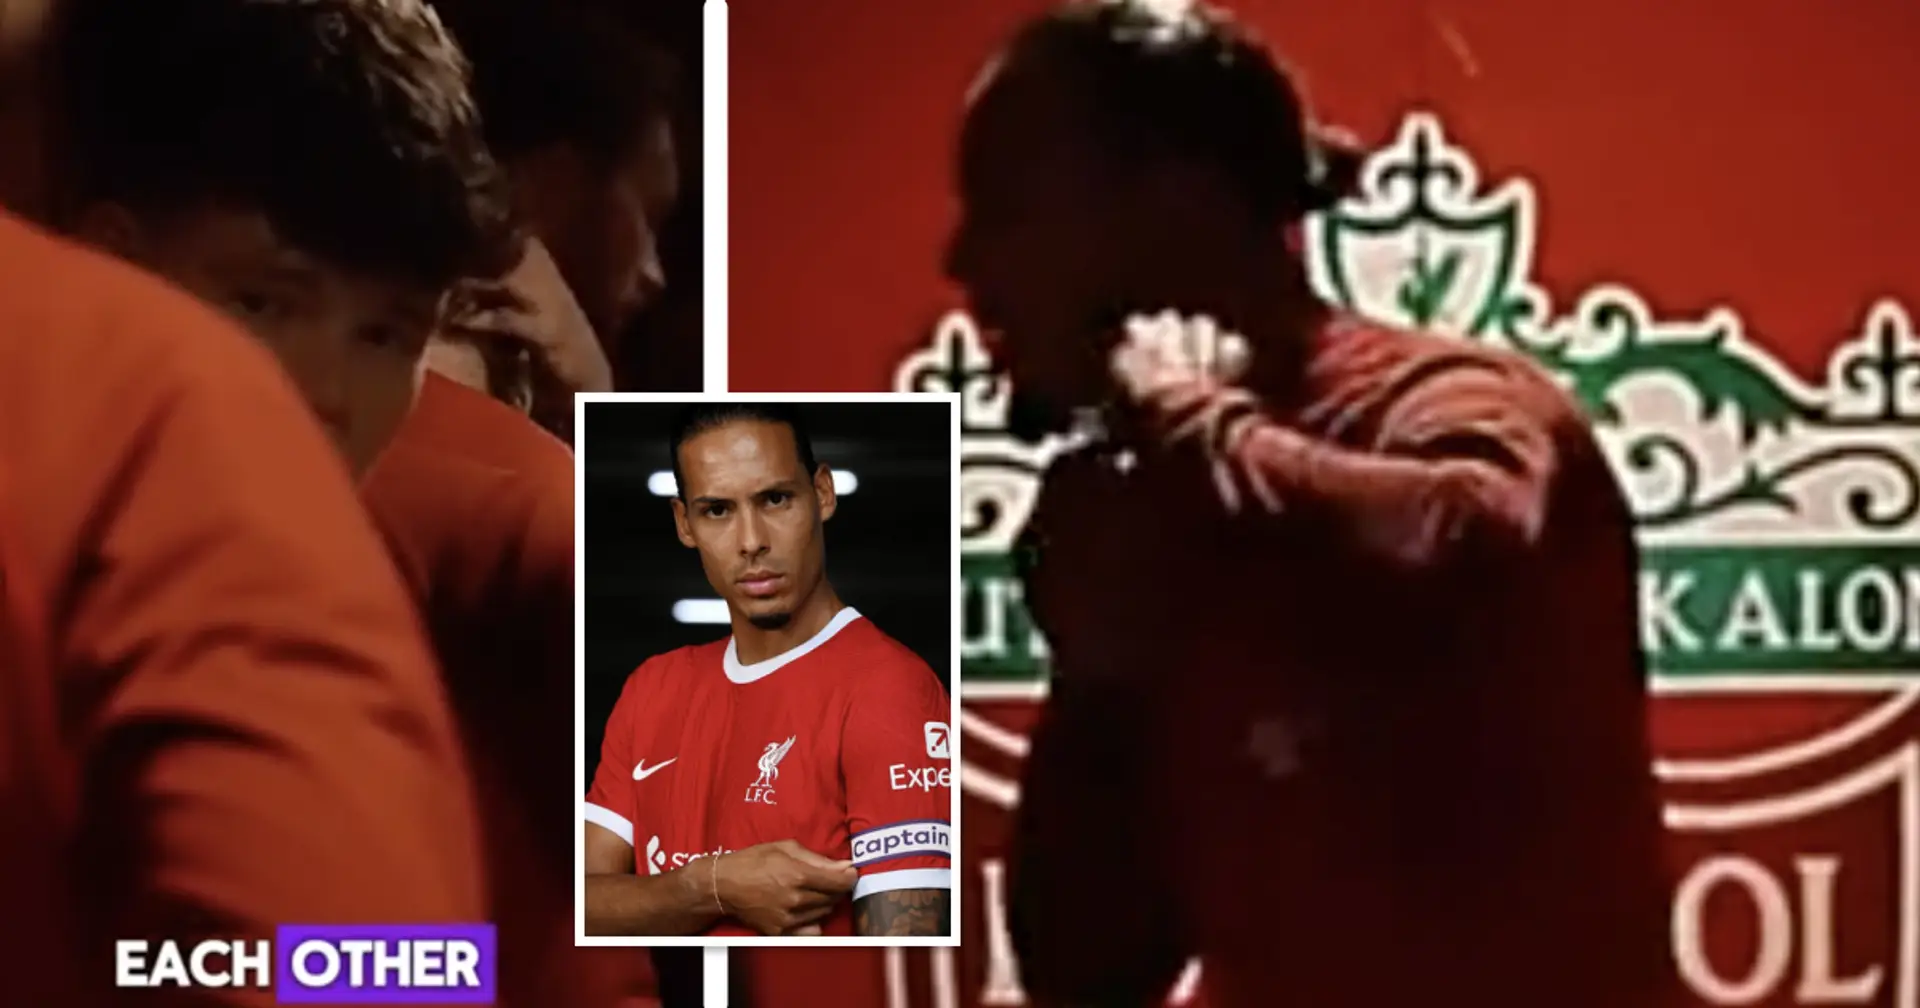 'I'm retired for 4 years, but this made me want to go to work': Liverpool fans react to Van Dijk's leaked captain speech